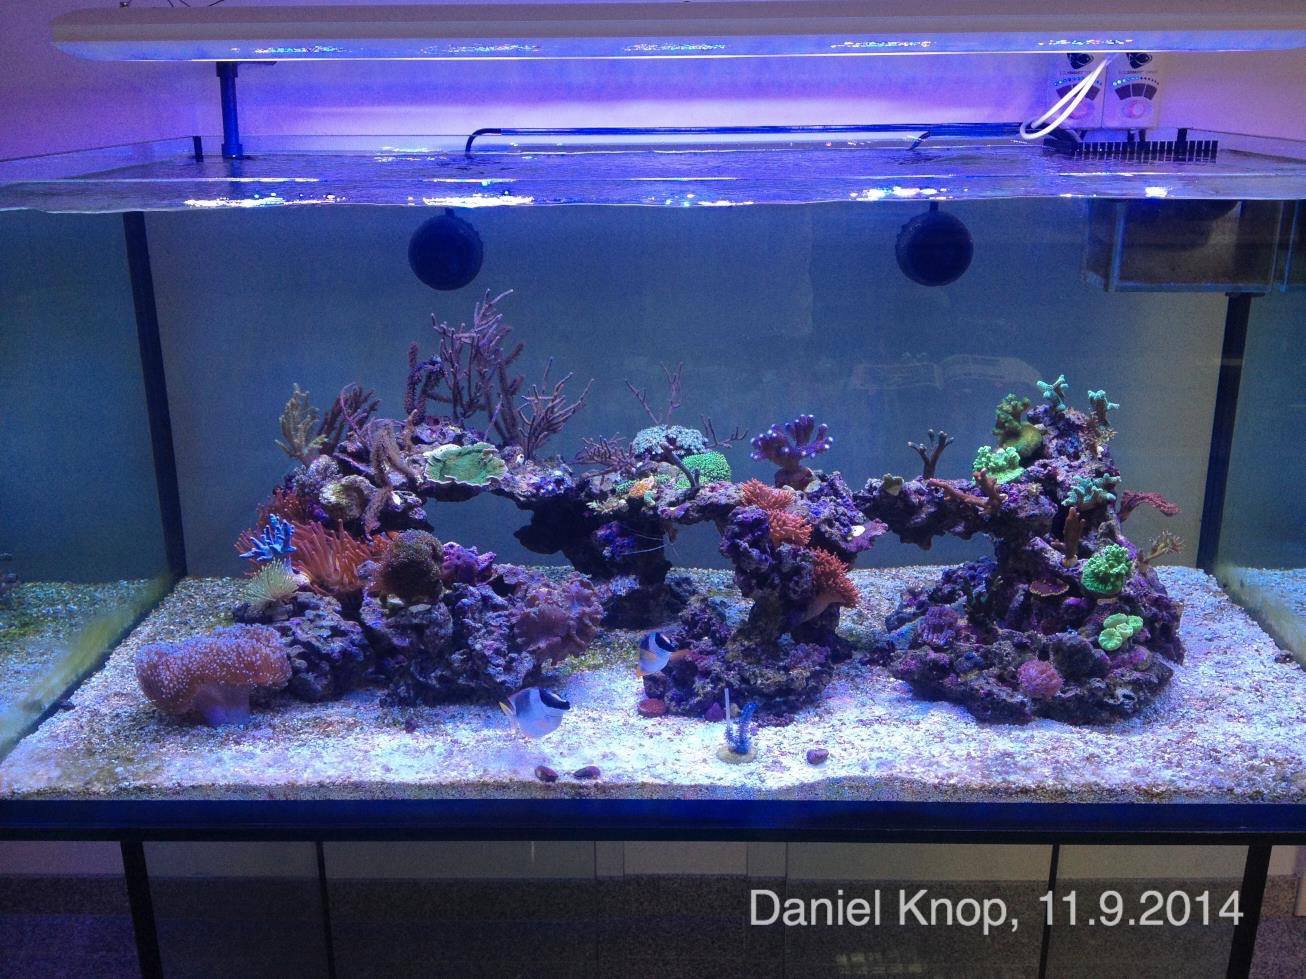 Knop's latest reef aquarium, situated in his office, as photographed September 11th, 2014.